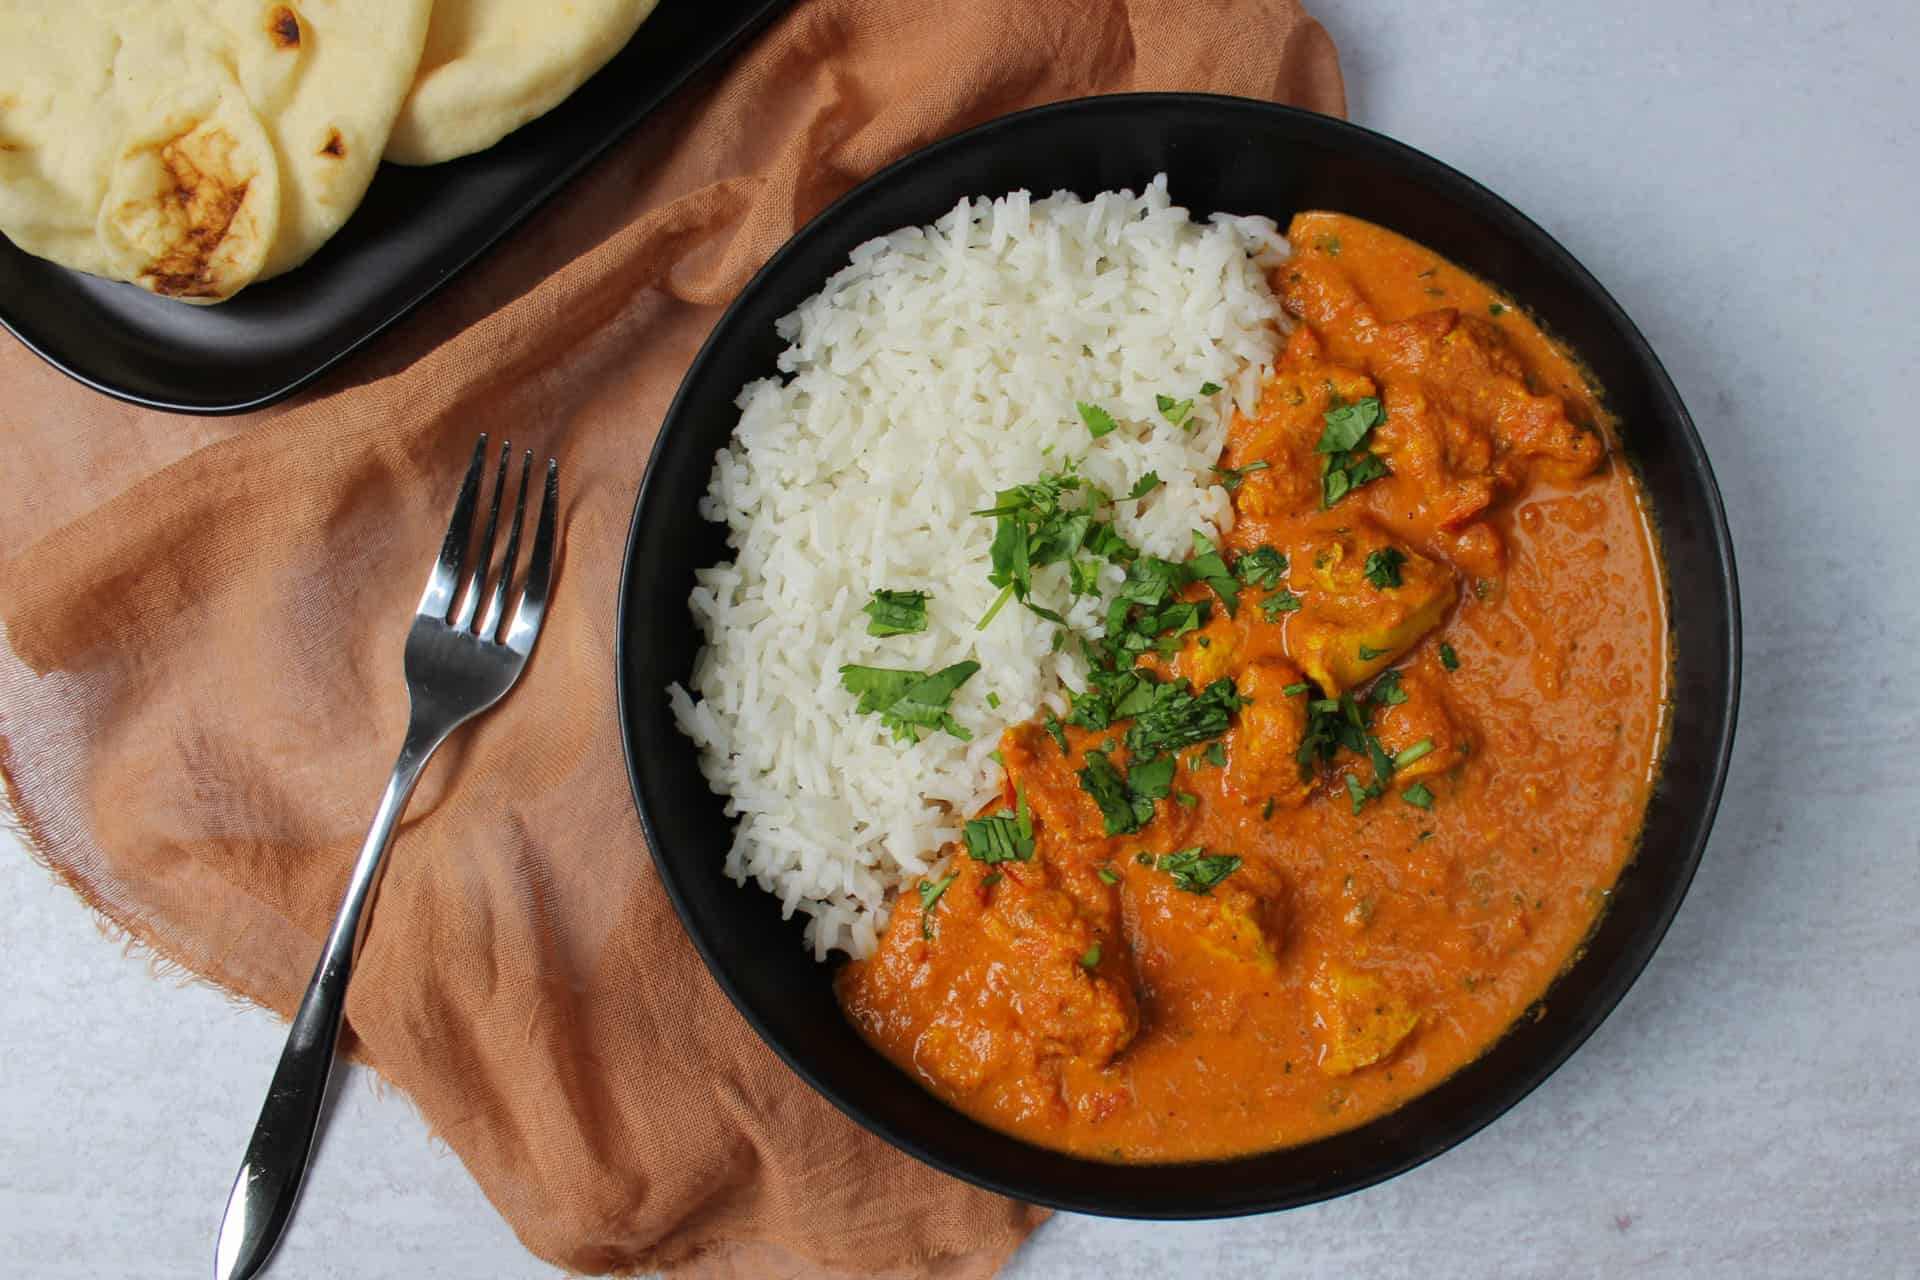 Spicy Indian butter chicken with rice and naan.